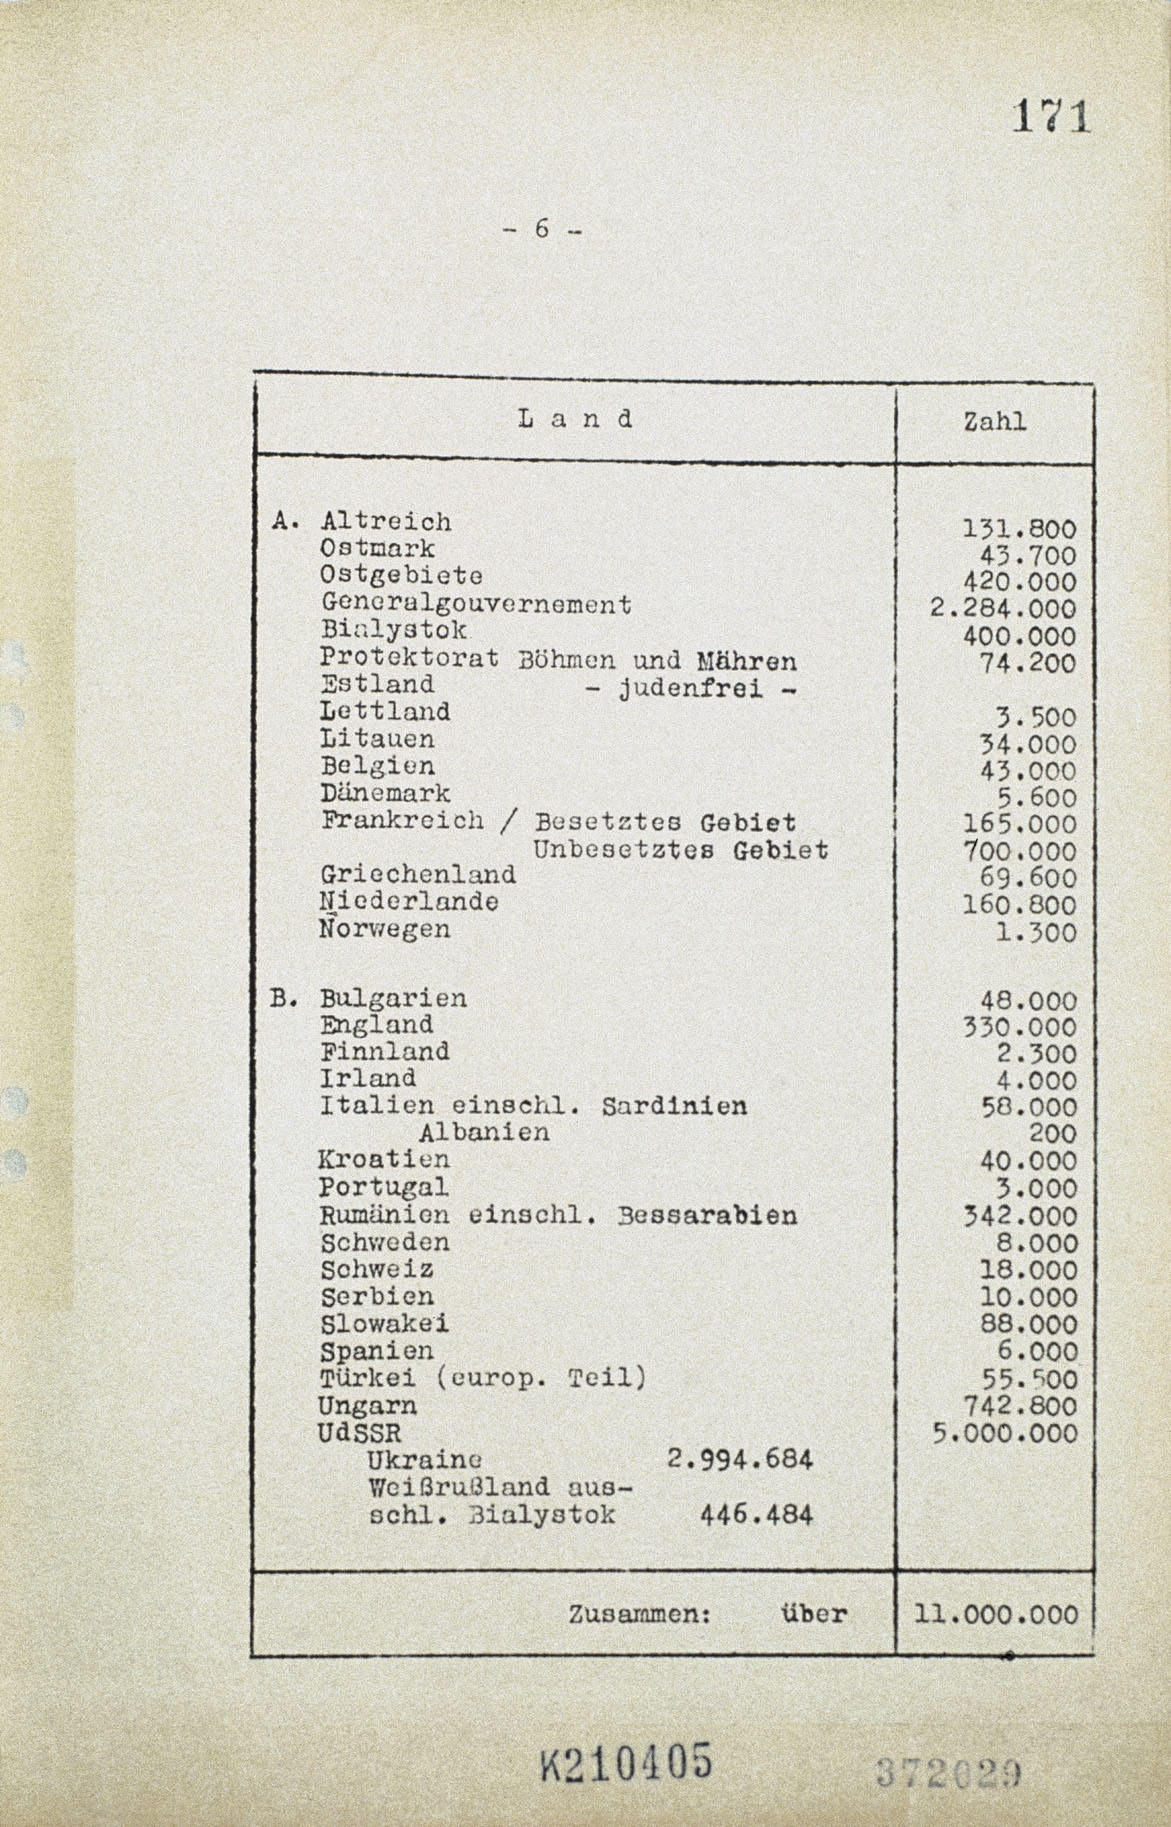 A page from the Protocols of the Wannsee Conference that lists the number of Jews included in the plan for the Final Solution. The number was estimated at 11 million